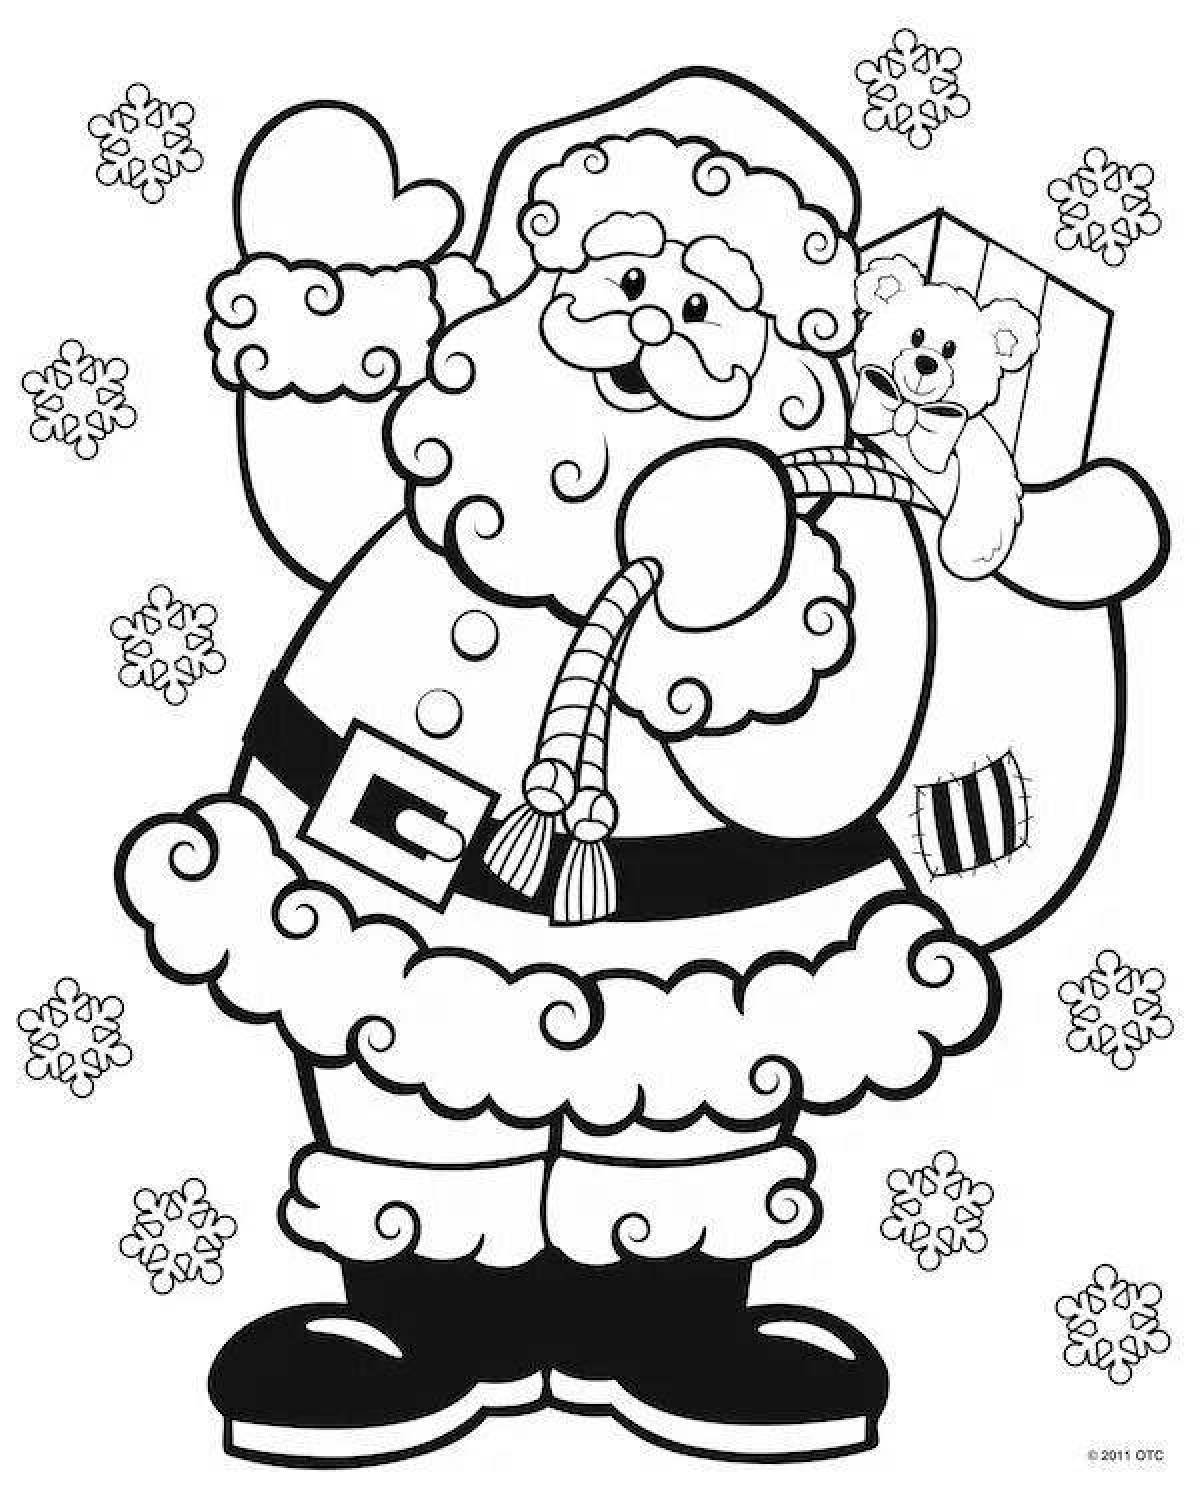 Humorous santa claus coloring book for kids 2-3 years old